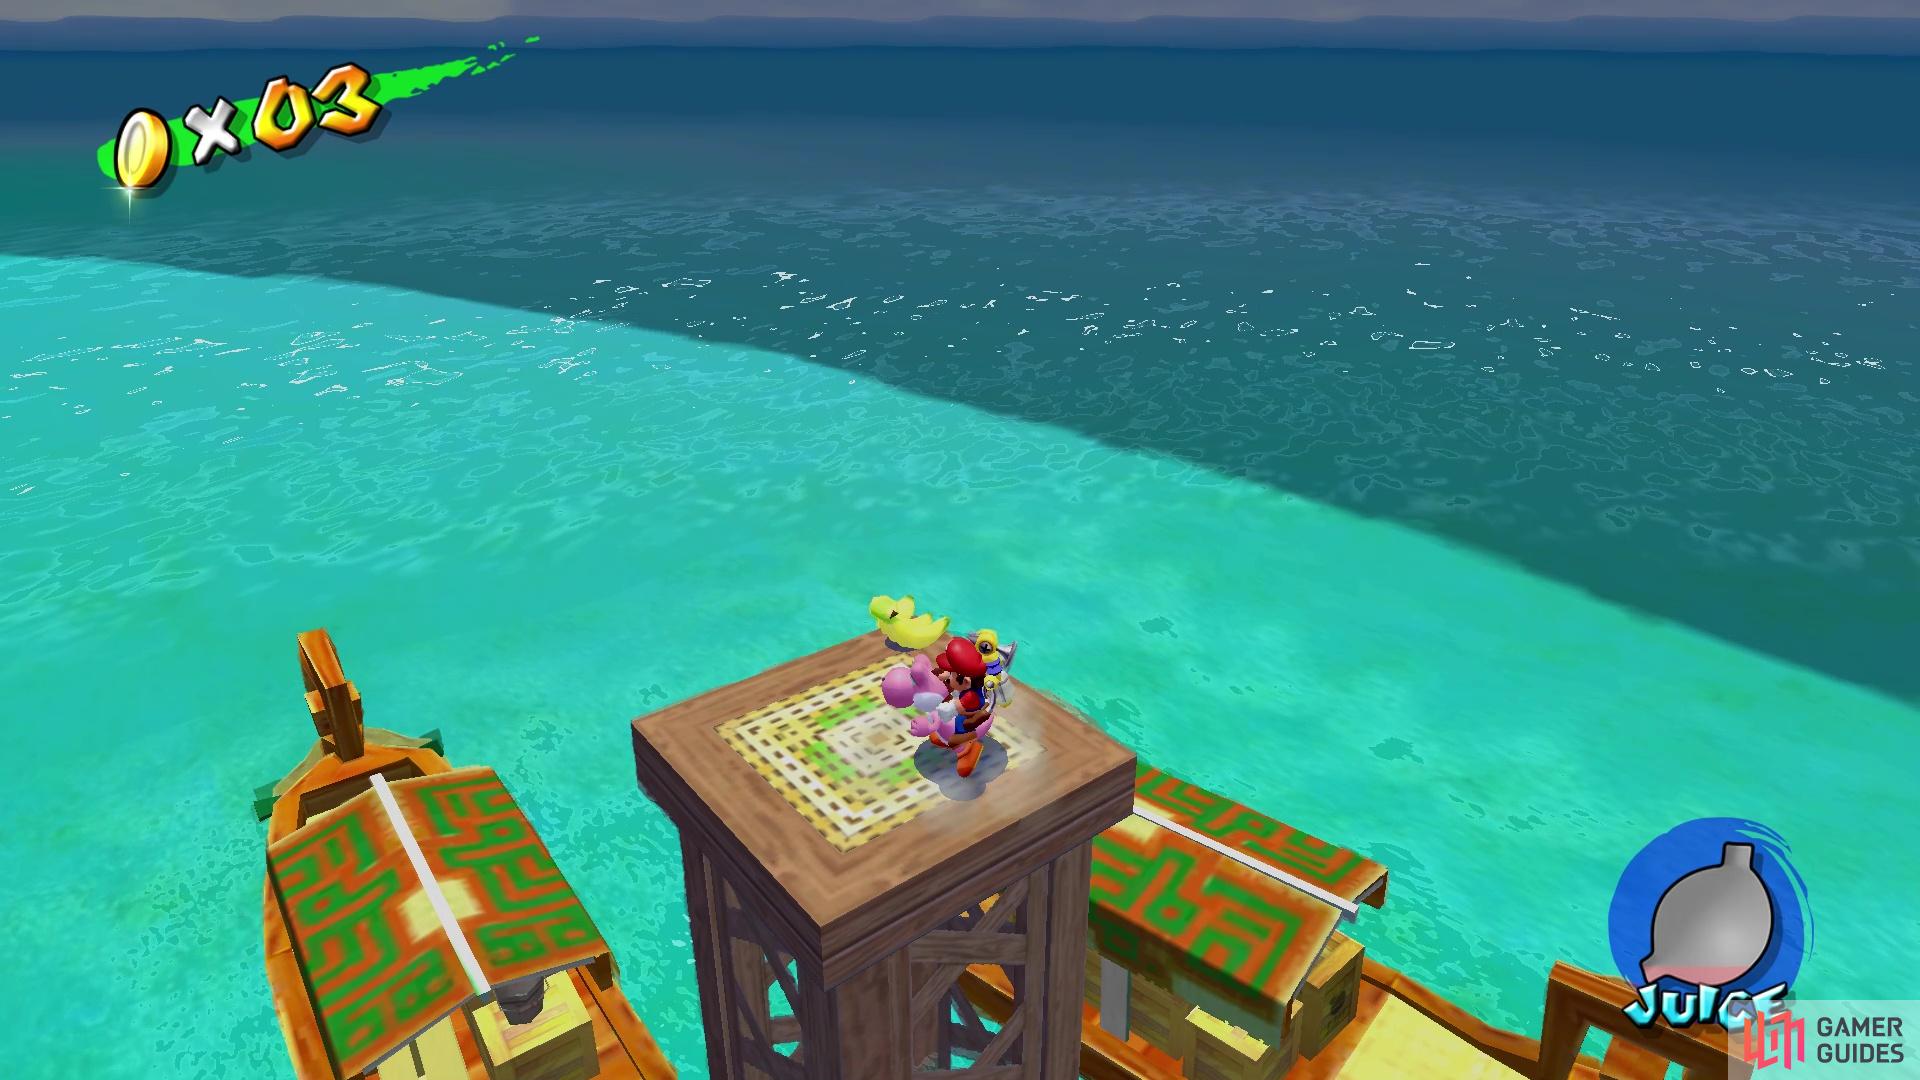 The bananas on this platform keep respawning, so keep eating until the third boat comes around